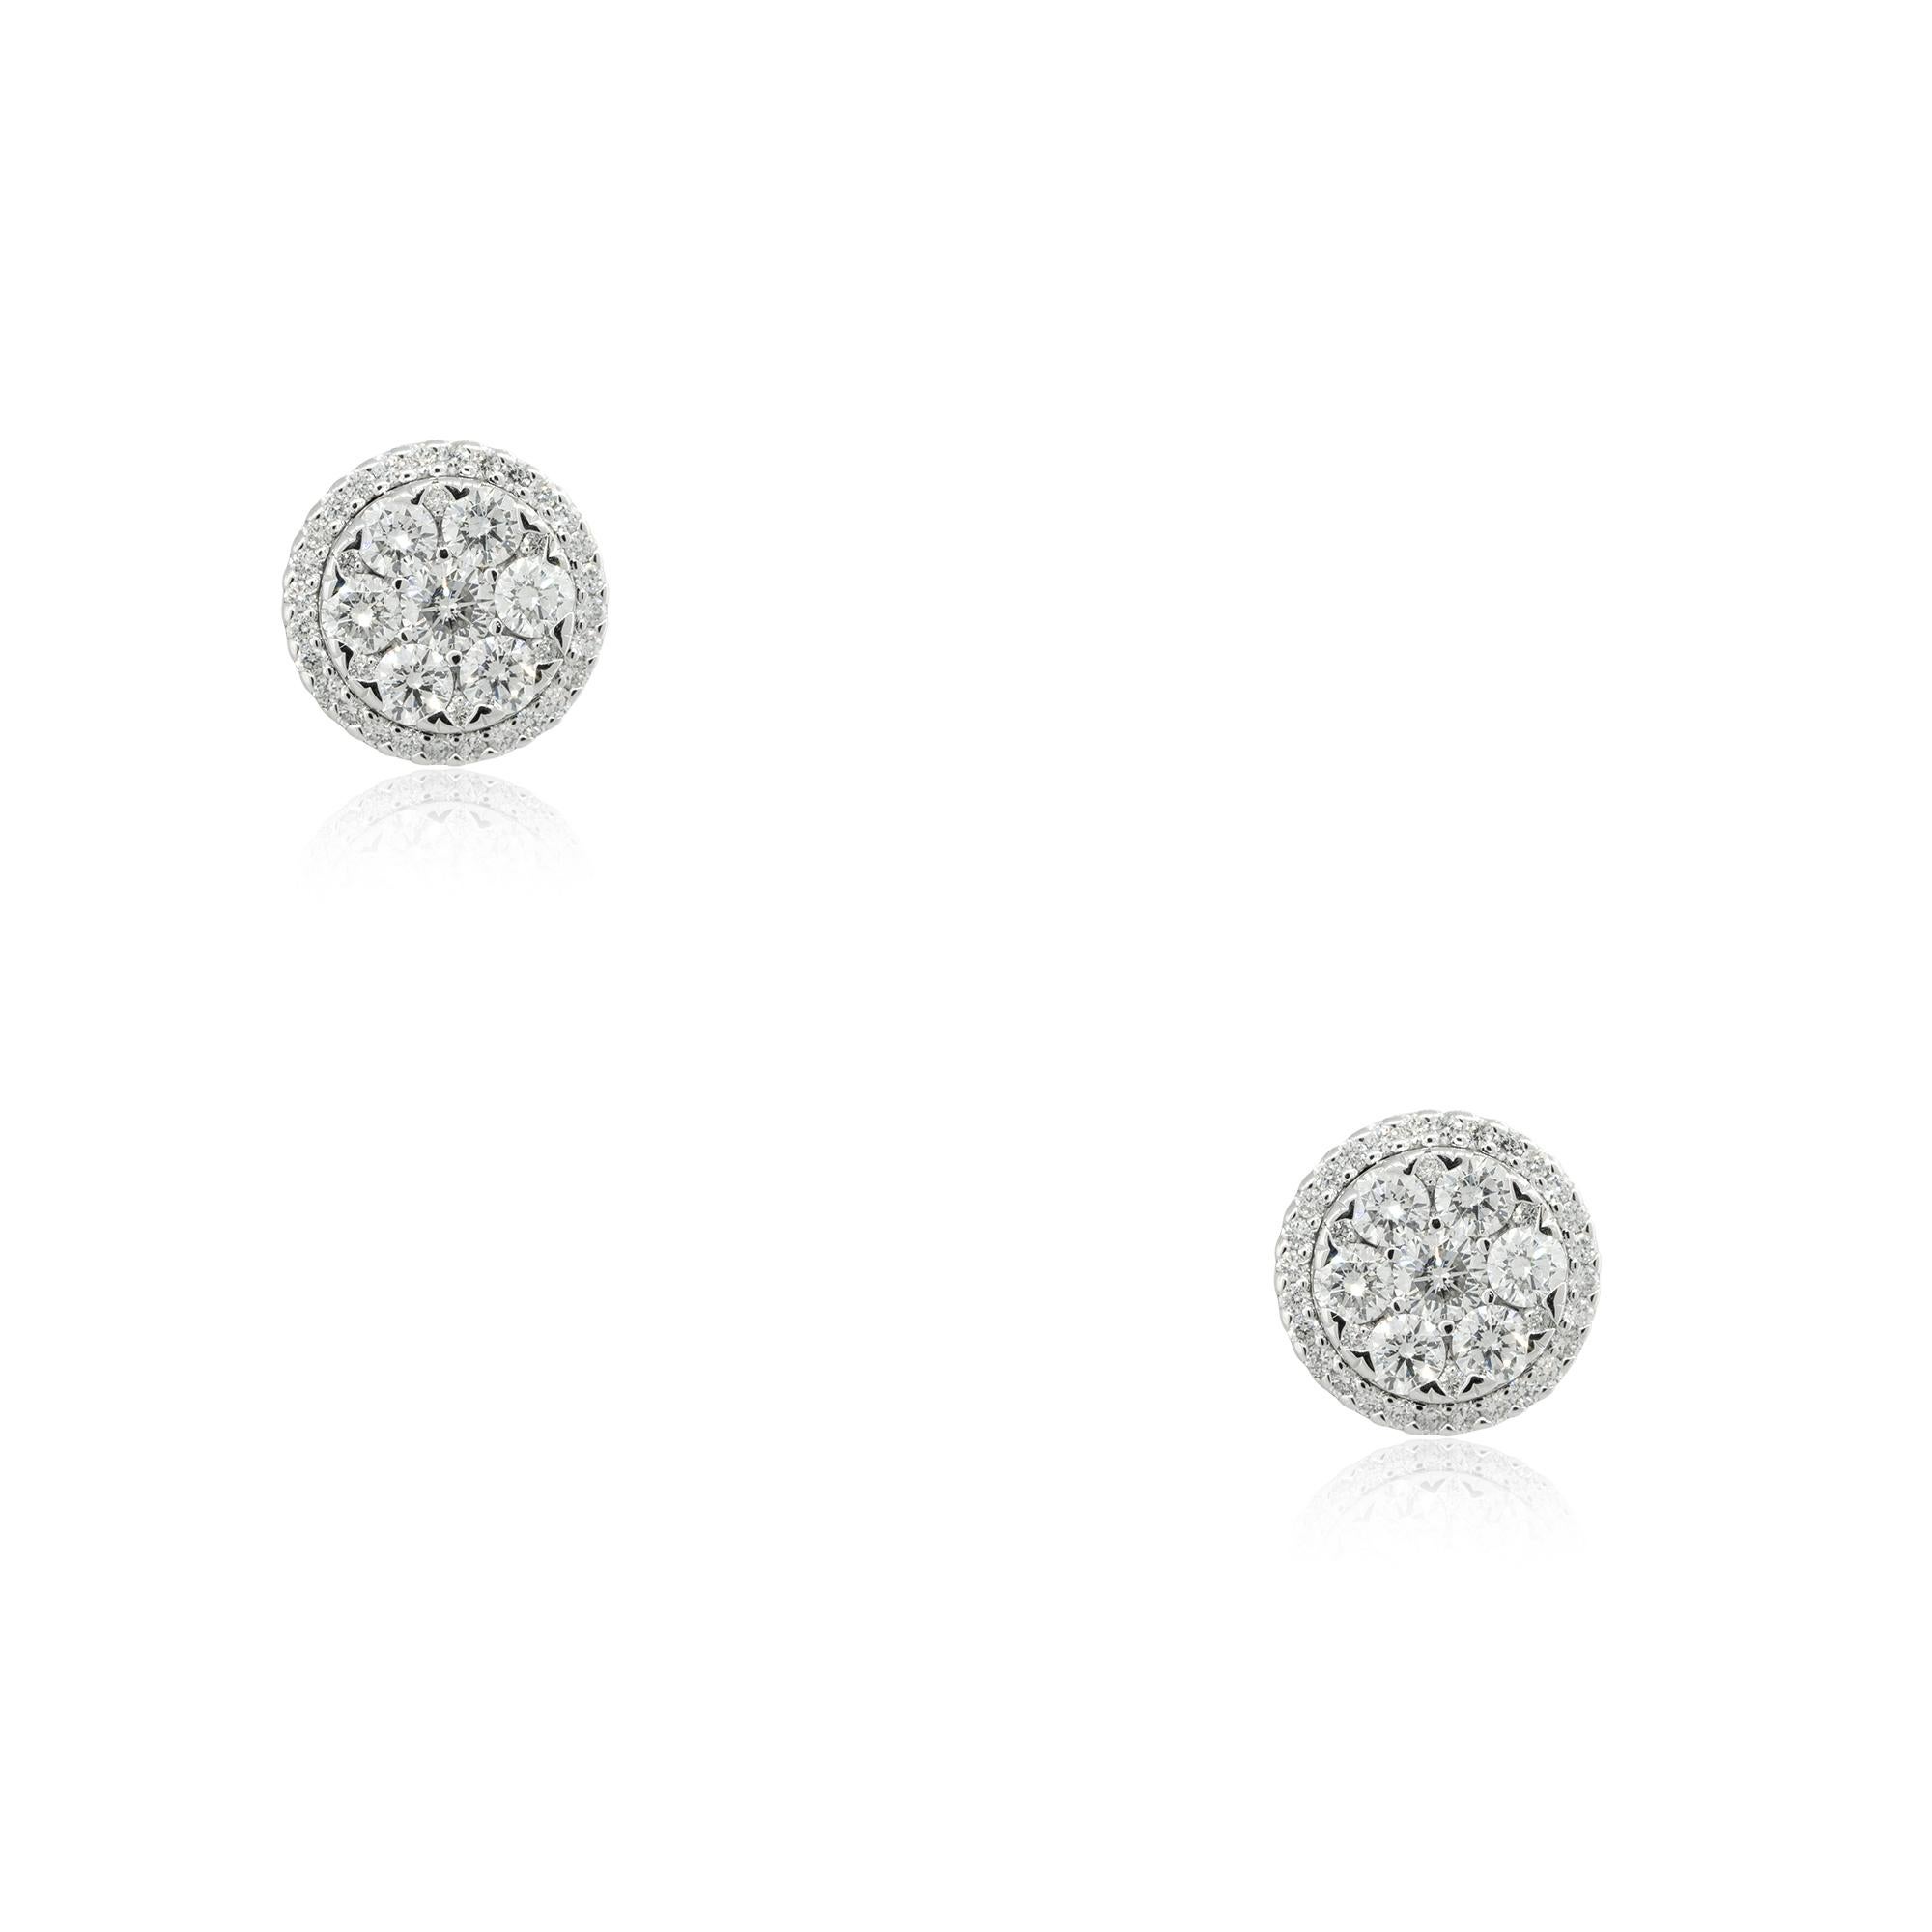 14k White Gold 2.33ctw Round Brilliant Diamond Cluster Stud Earrings
Material: 14k White Gold
Diamond Details: Diamonds are approximately 2.33ctw of Round Brilliant Diamonds. There are 7 larger round stones in each earring and both earrings have